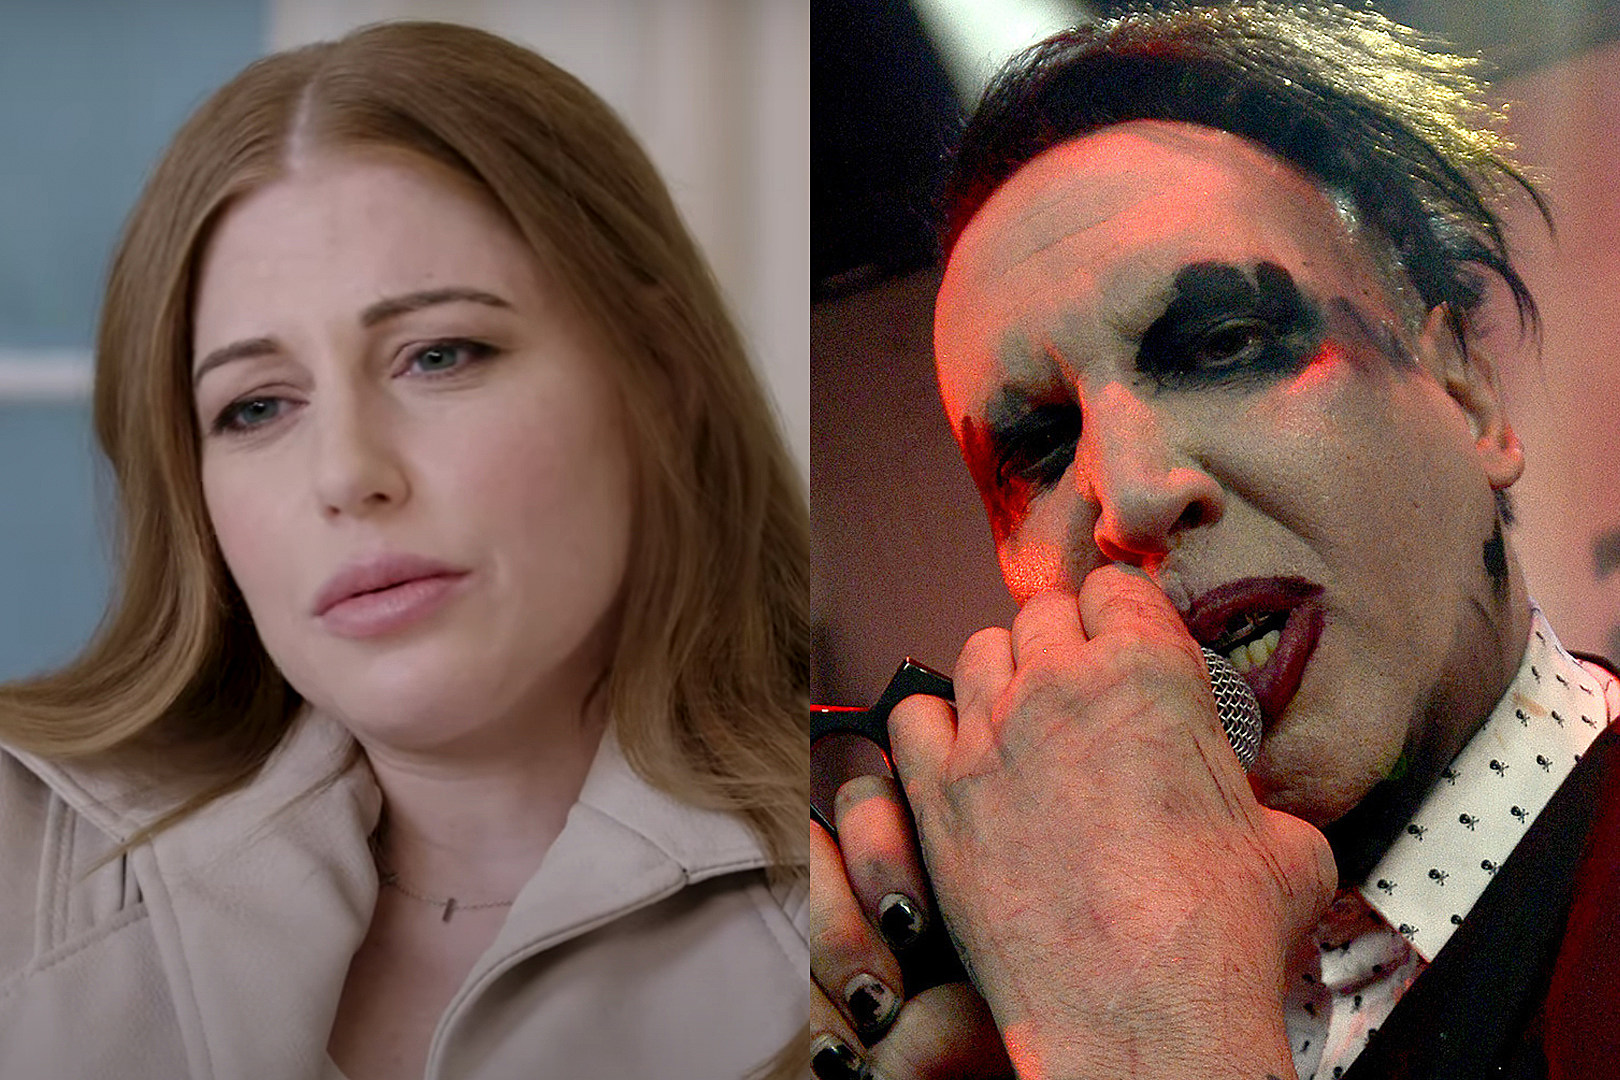 Ashley Morgan Smithline recanted sexual abuse allegations against Marilyn Manson